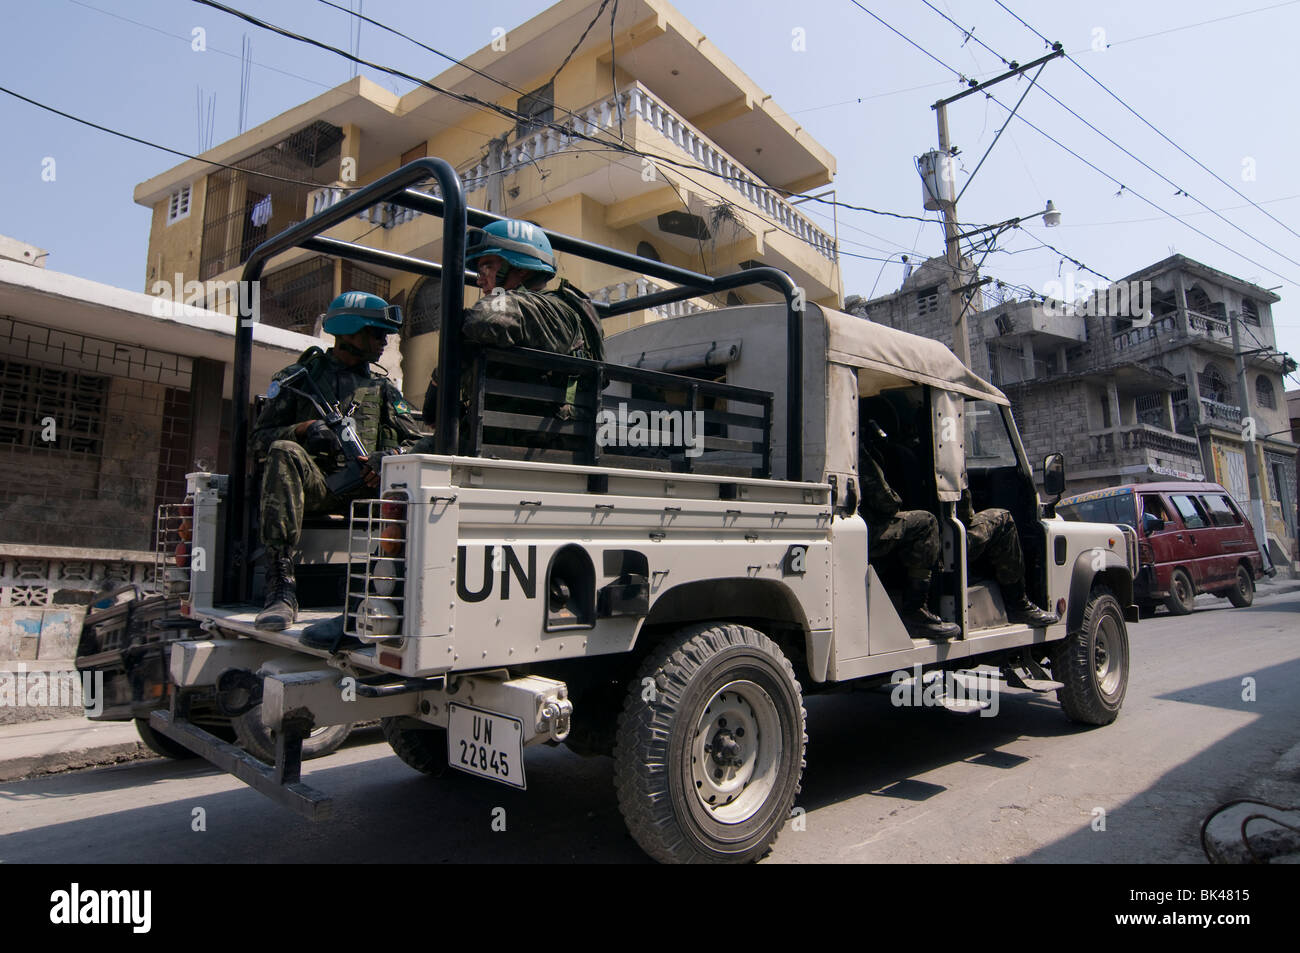 Peacekeeping policemen carrying out The United Nations Stabilization Mission in Haiti (MINUSTAH) riding through the city of Port au Prince in Haiti Stock Photo